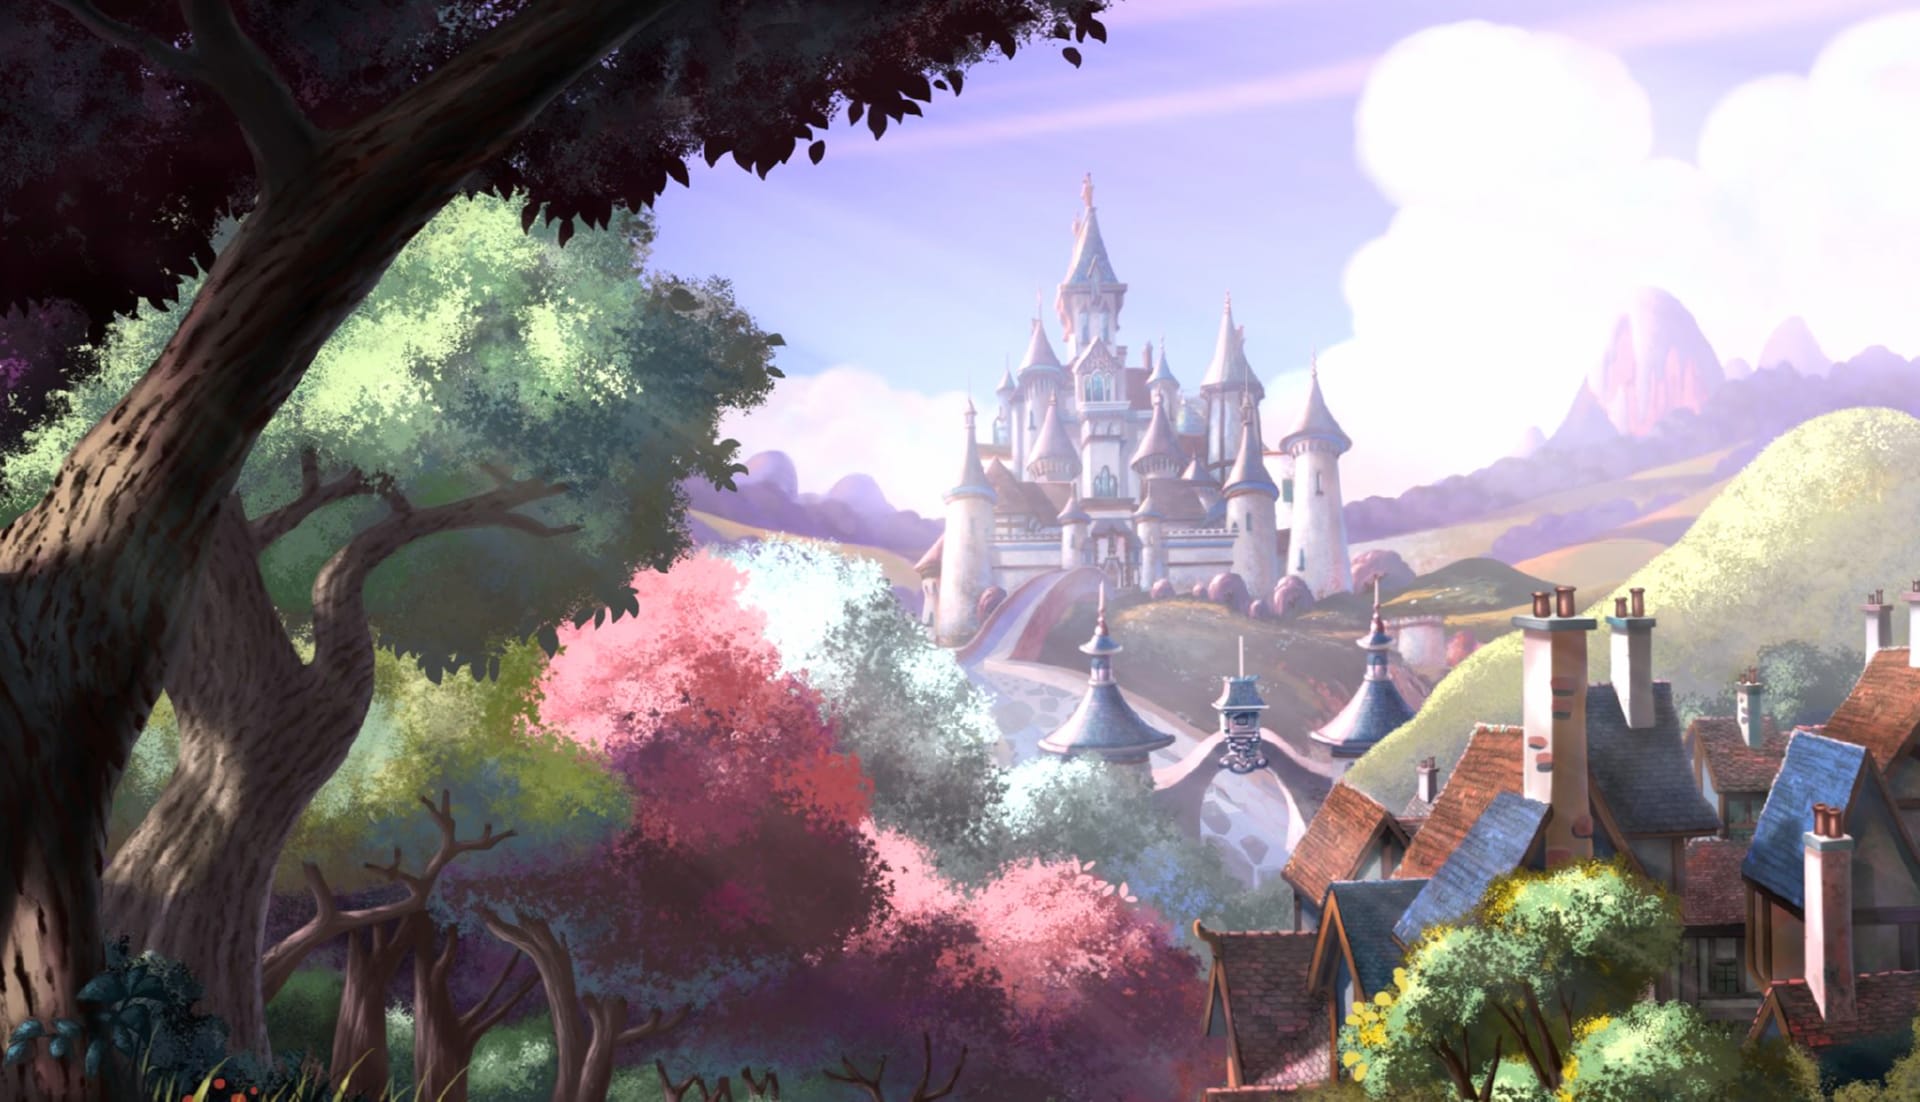 Sofia the First Once Upon a Princess wallpapers HD quality